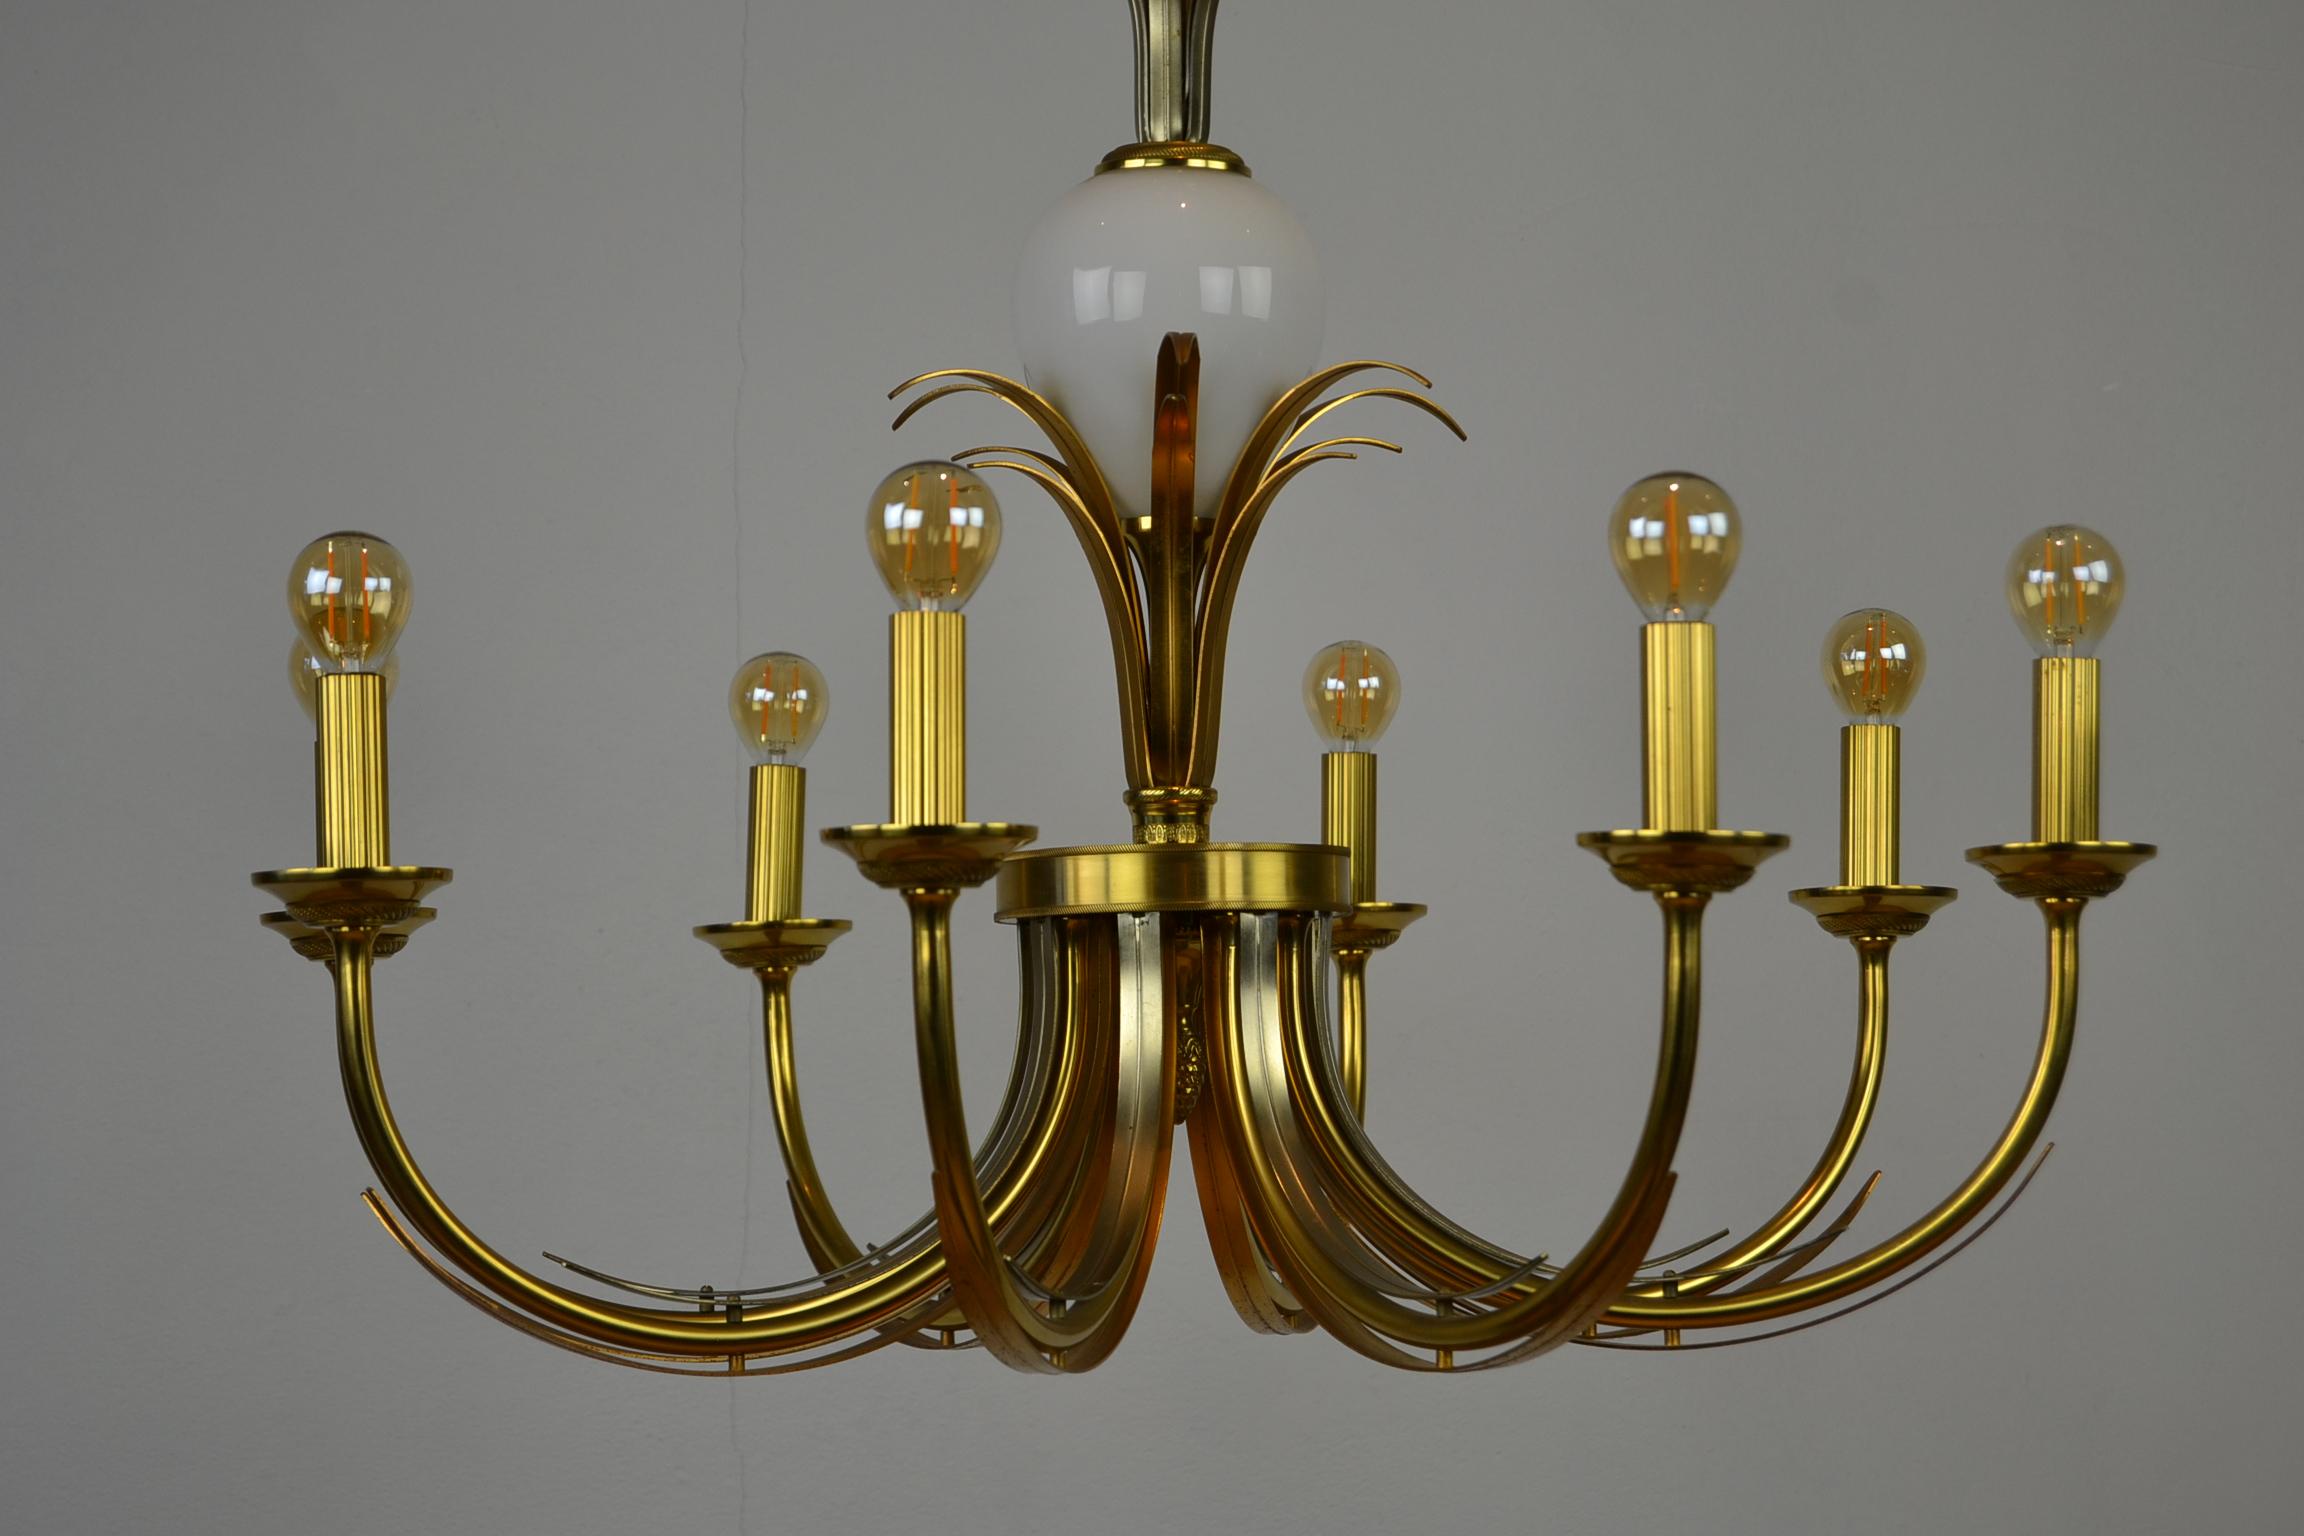 Hollywood Regency brass chandelier with glass ostrich egg from the 1970s
in the style of Maison Charles France or Boulanger Belgium.
 
This elegant ceiling light has 8 arms with gilded metal leaves and a large opaline glass ostrich egg in the